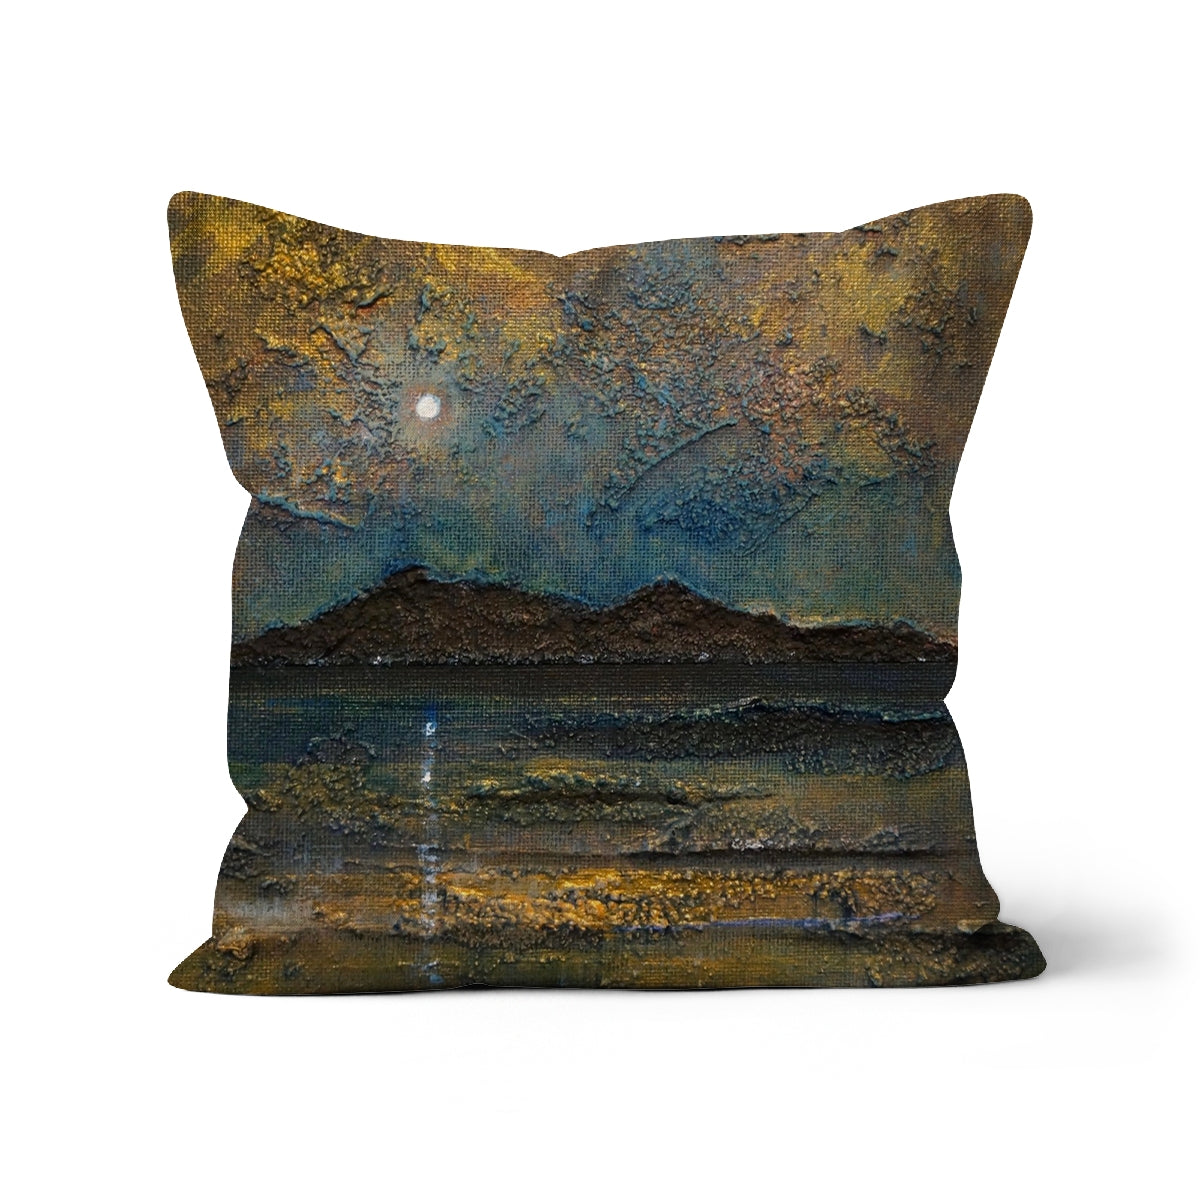 Arran Moonlight Art Gifts Cushion-Cushions-Arran Art Gallery-Faux Suede-24"x24"-Paintings, Prints, Homeware, Art Gifts From Scotland By Scottish Artist Kevin Hunter